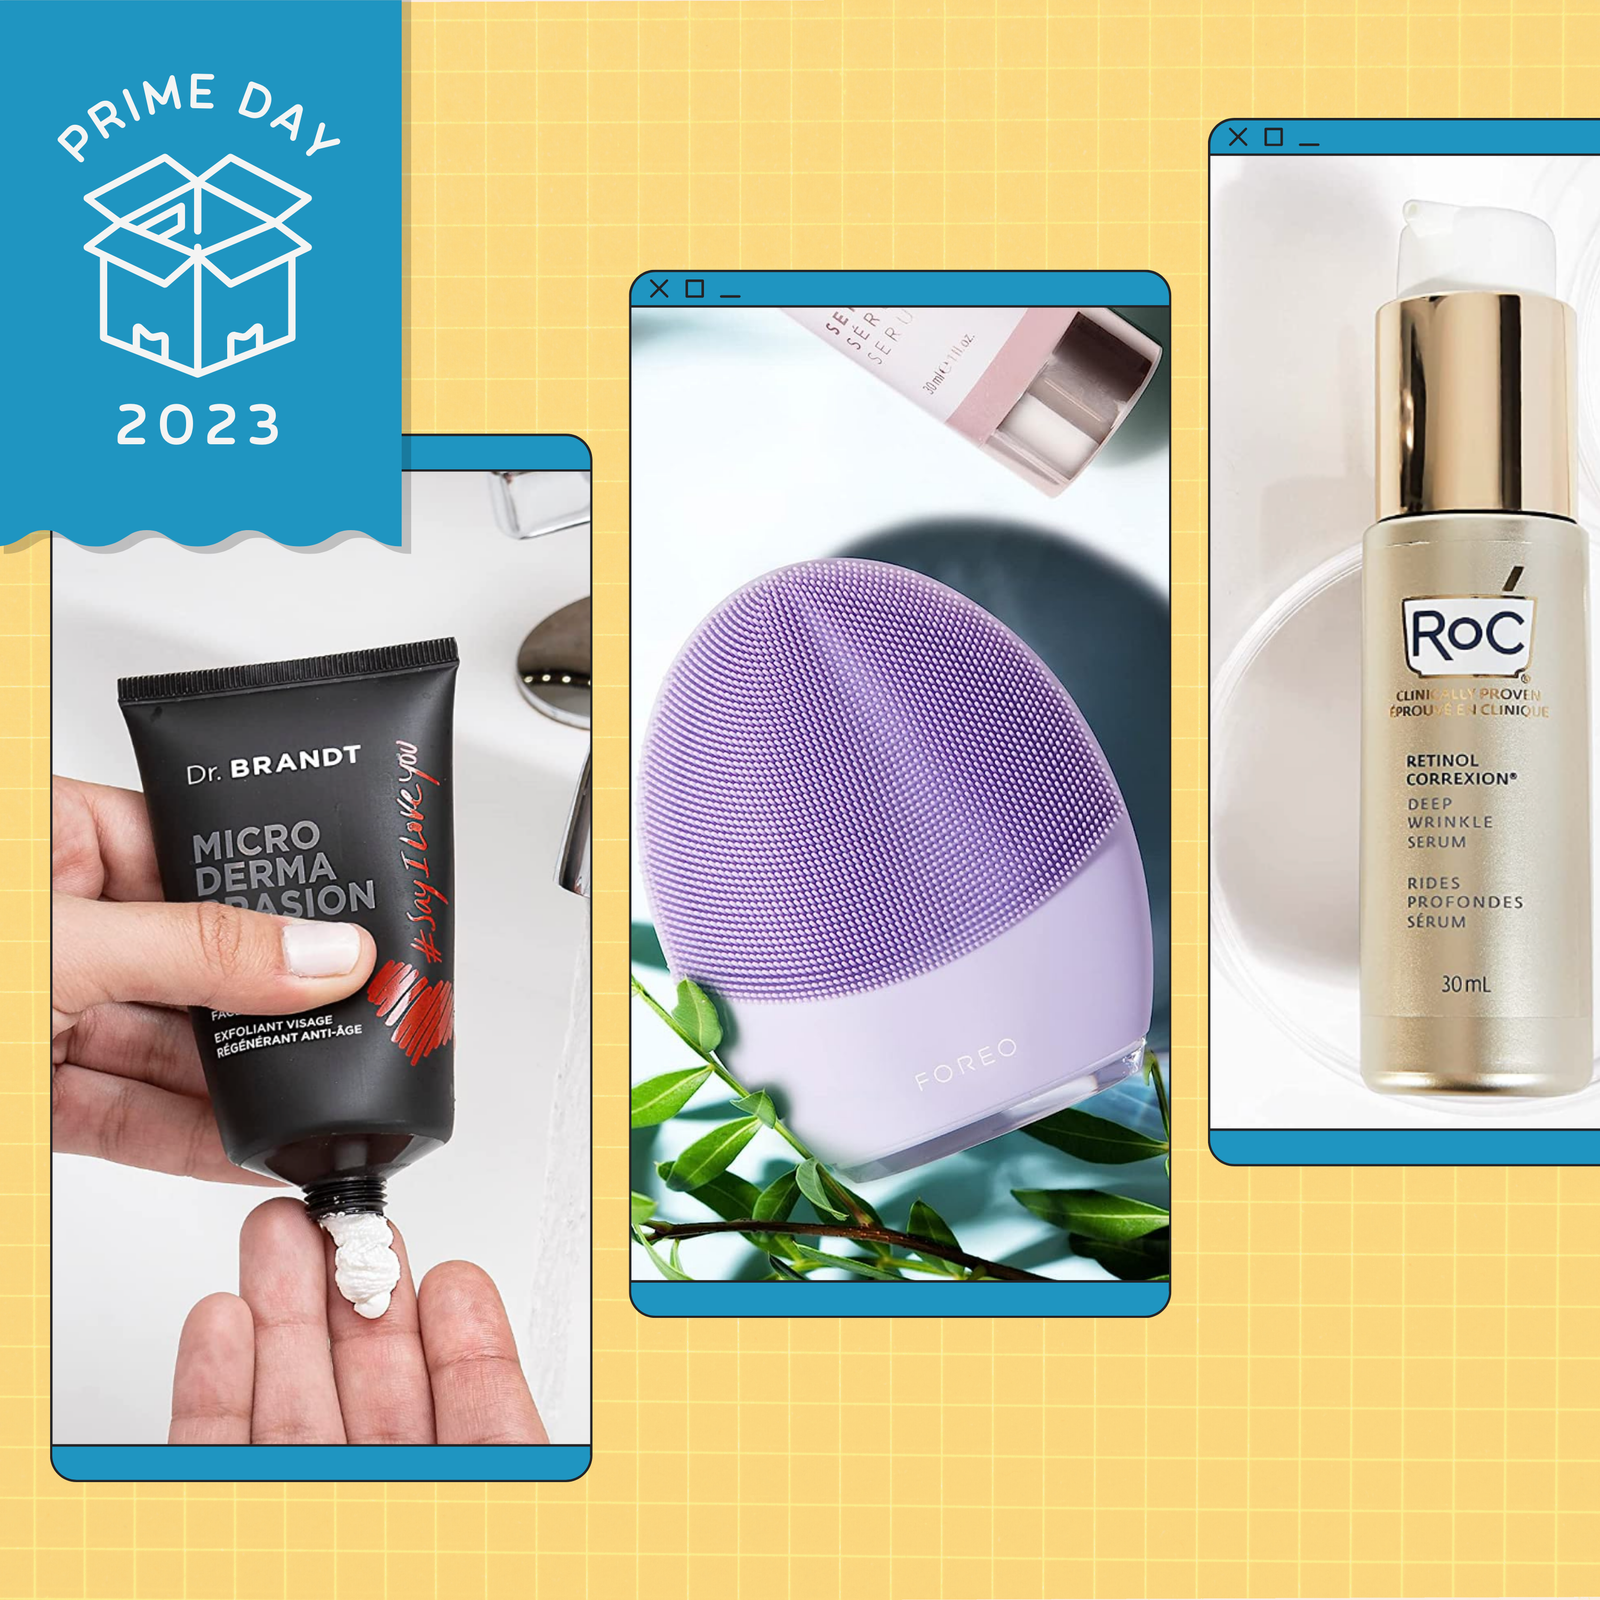 20 Early Prime Day Deals on Skin Care Faves